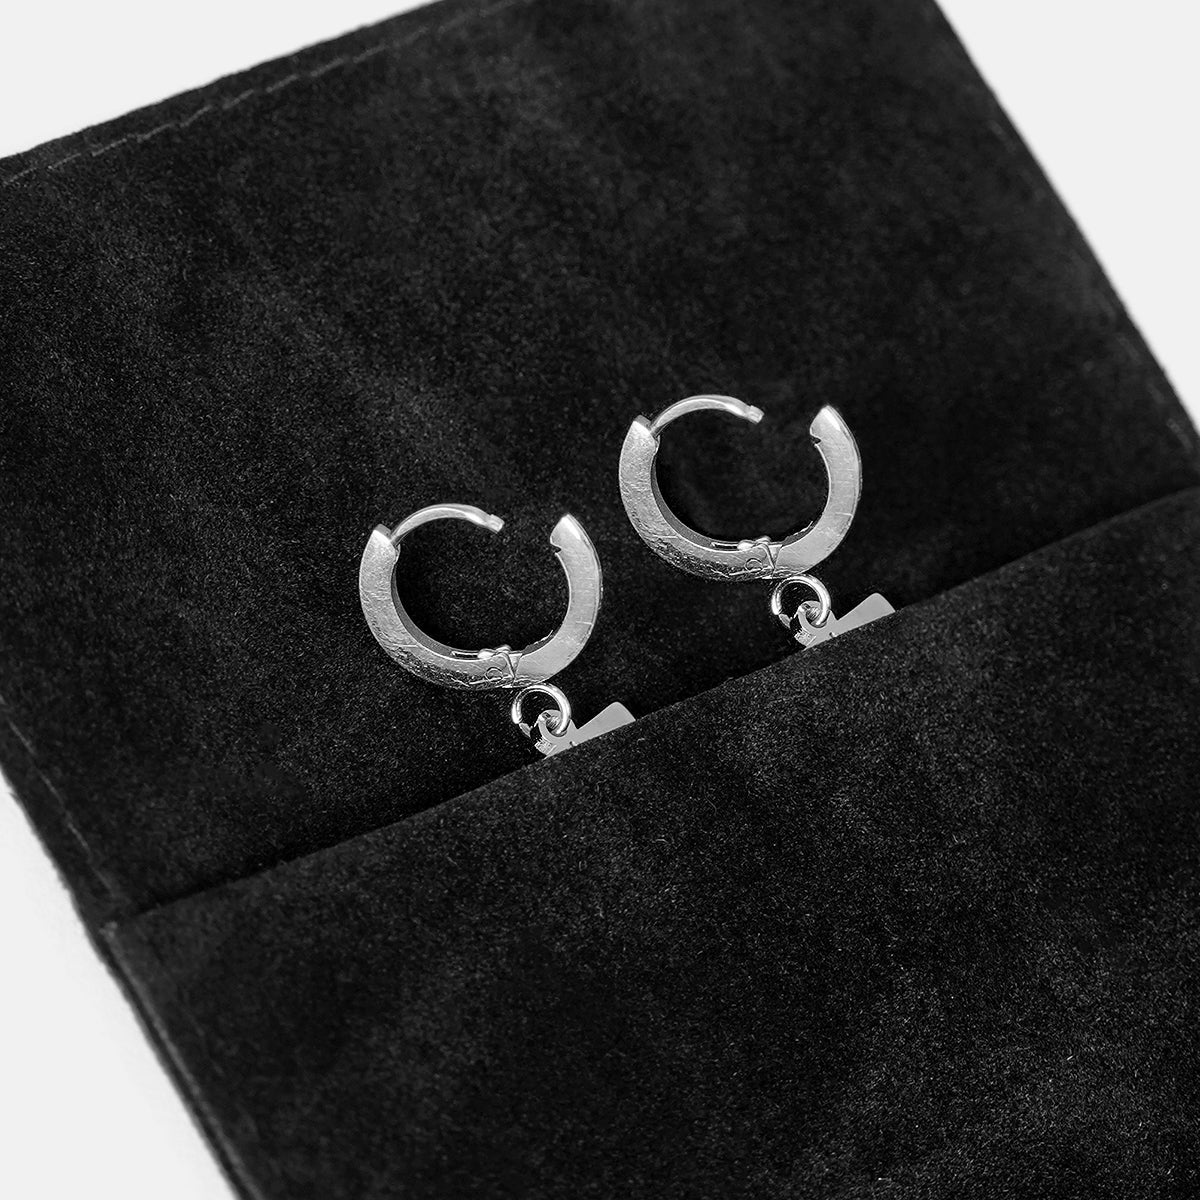 89 Number Earring - Stainless Steel